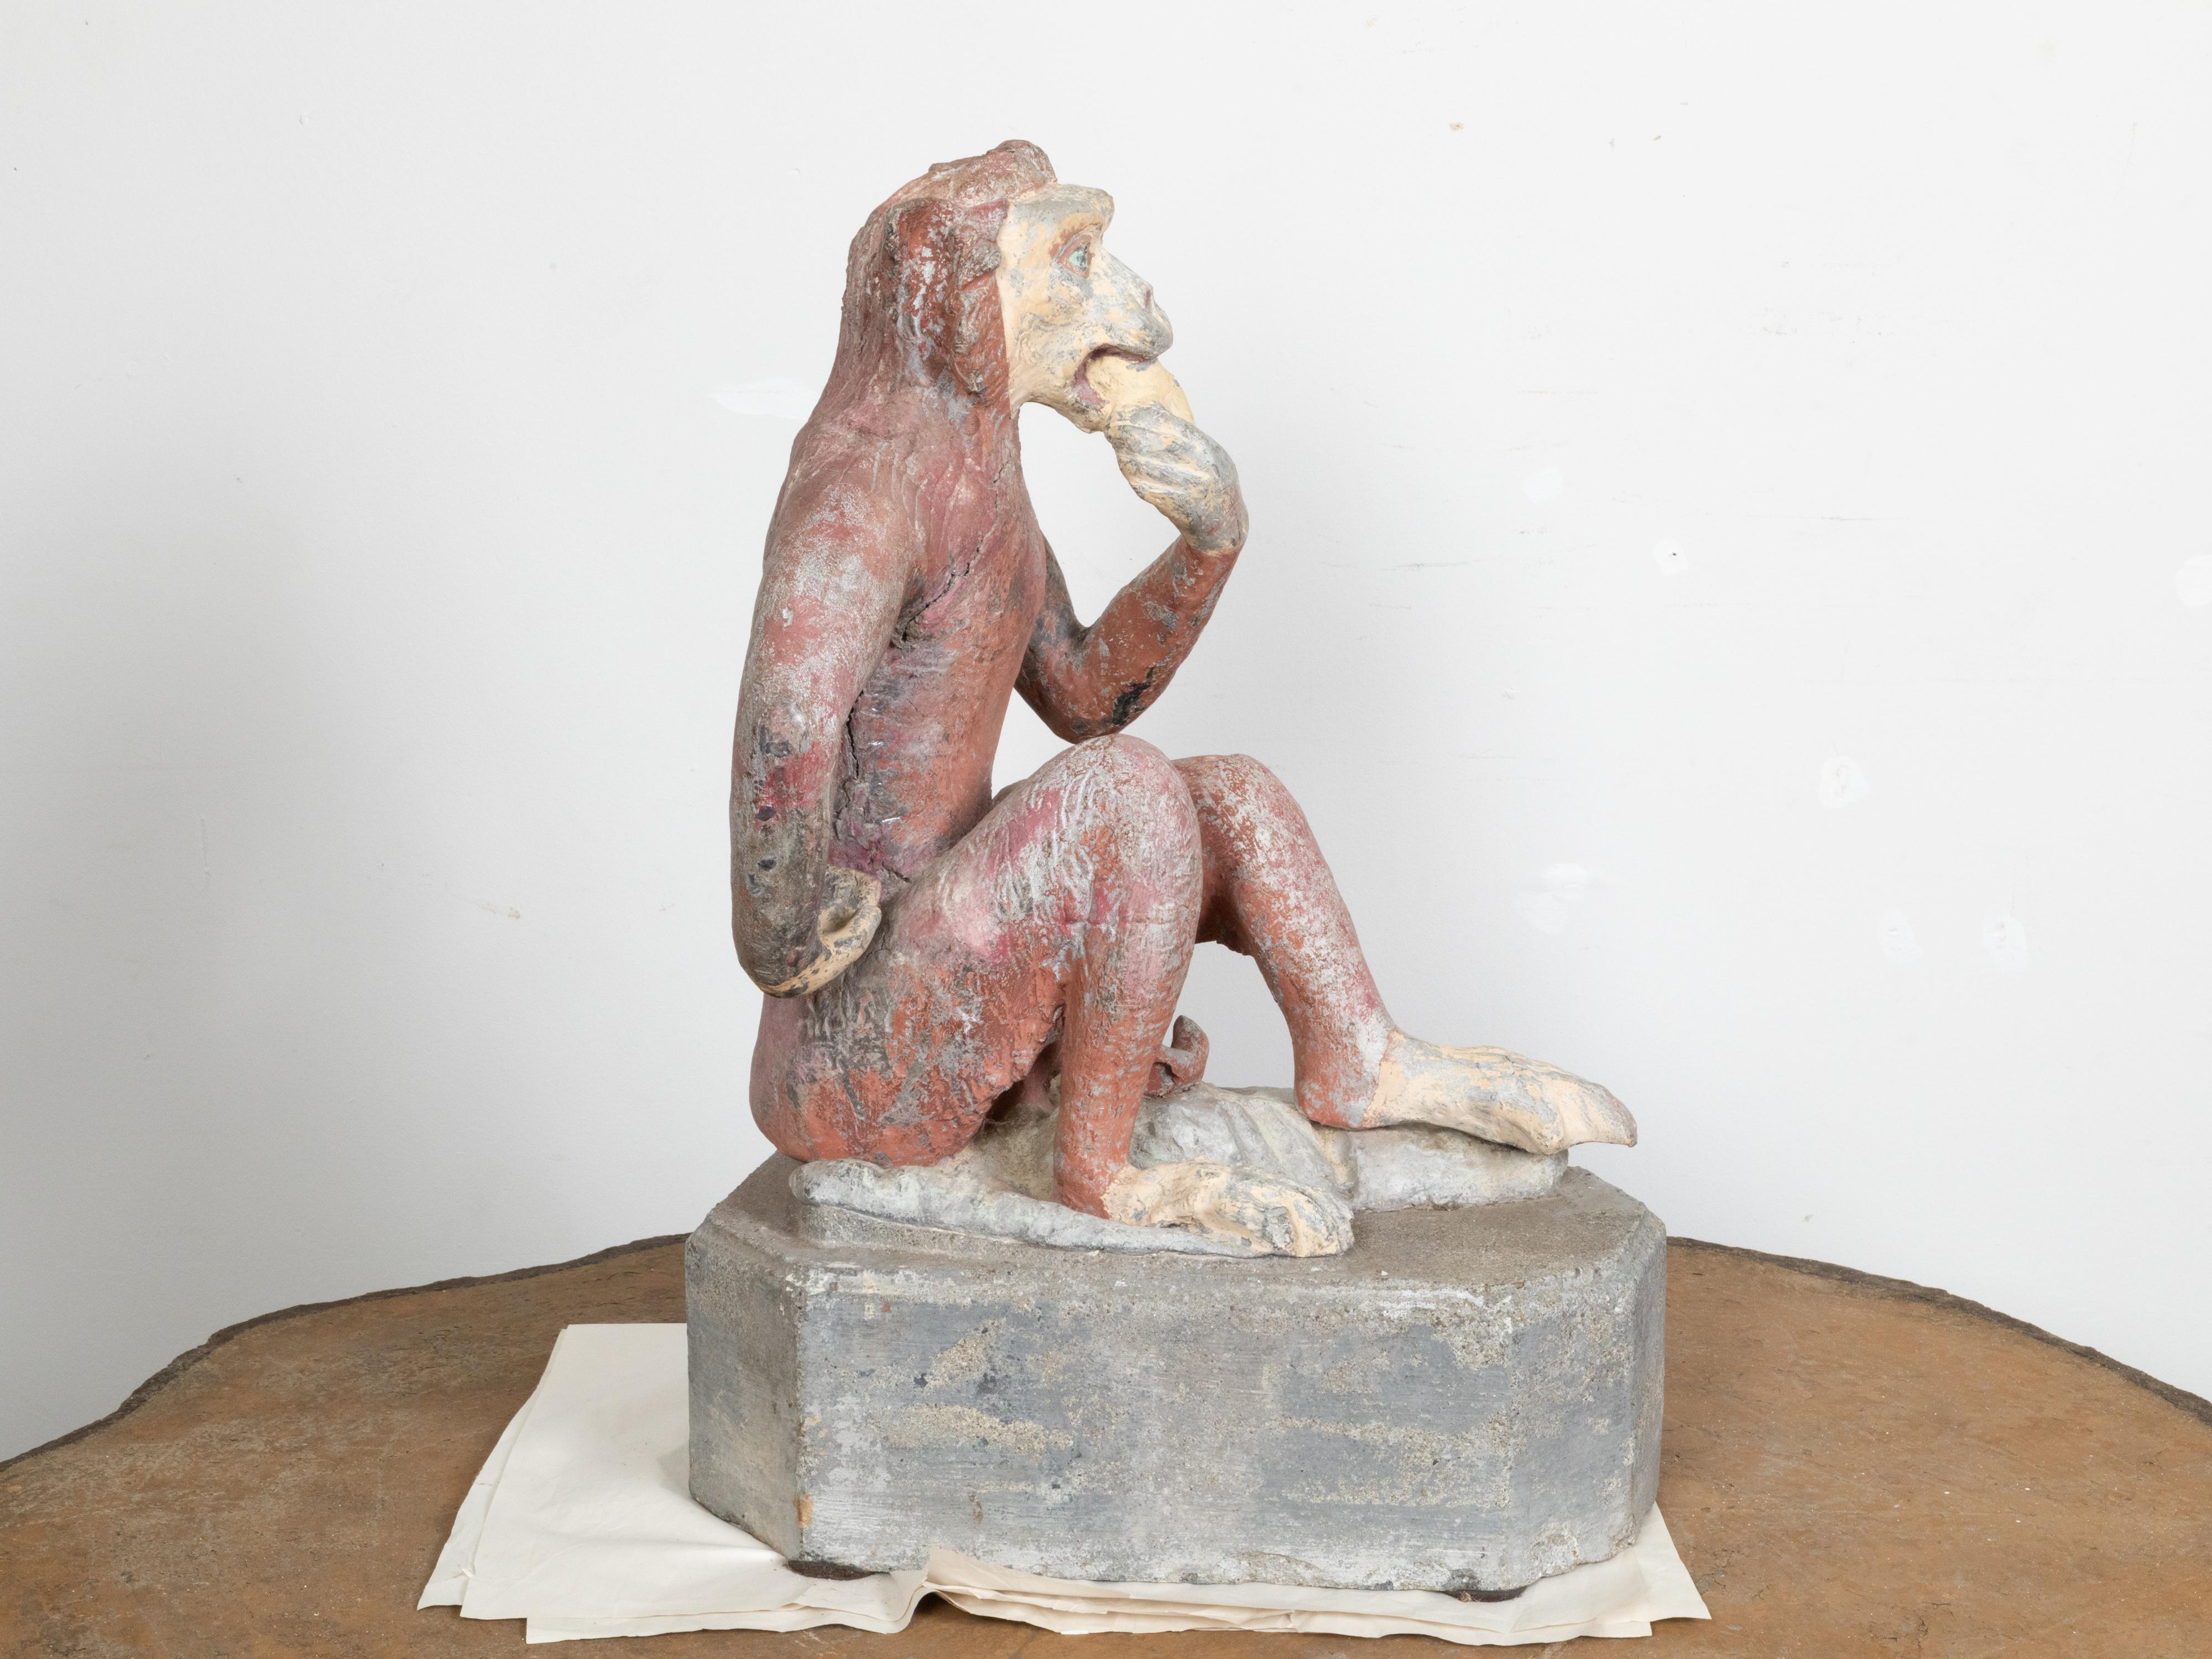 Painted French Midcentury Lead Sculpture of a Monkey Eating a Banana with Aged Patina For Sale